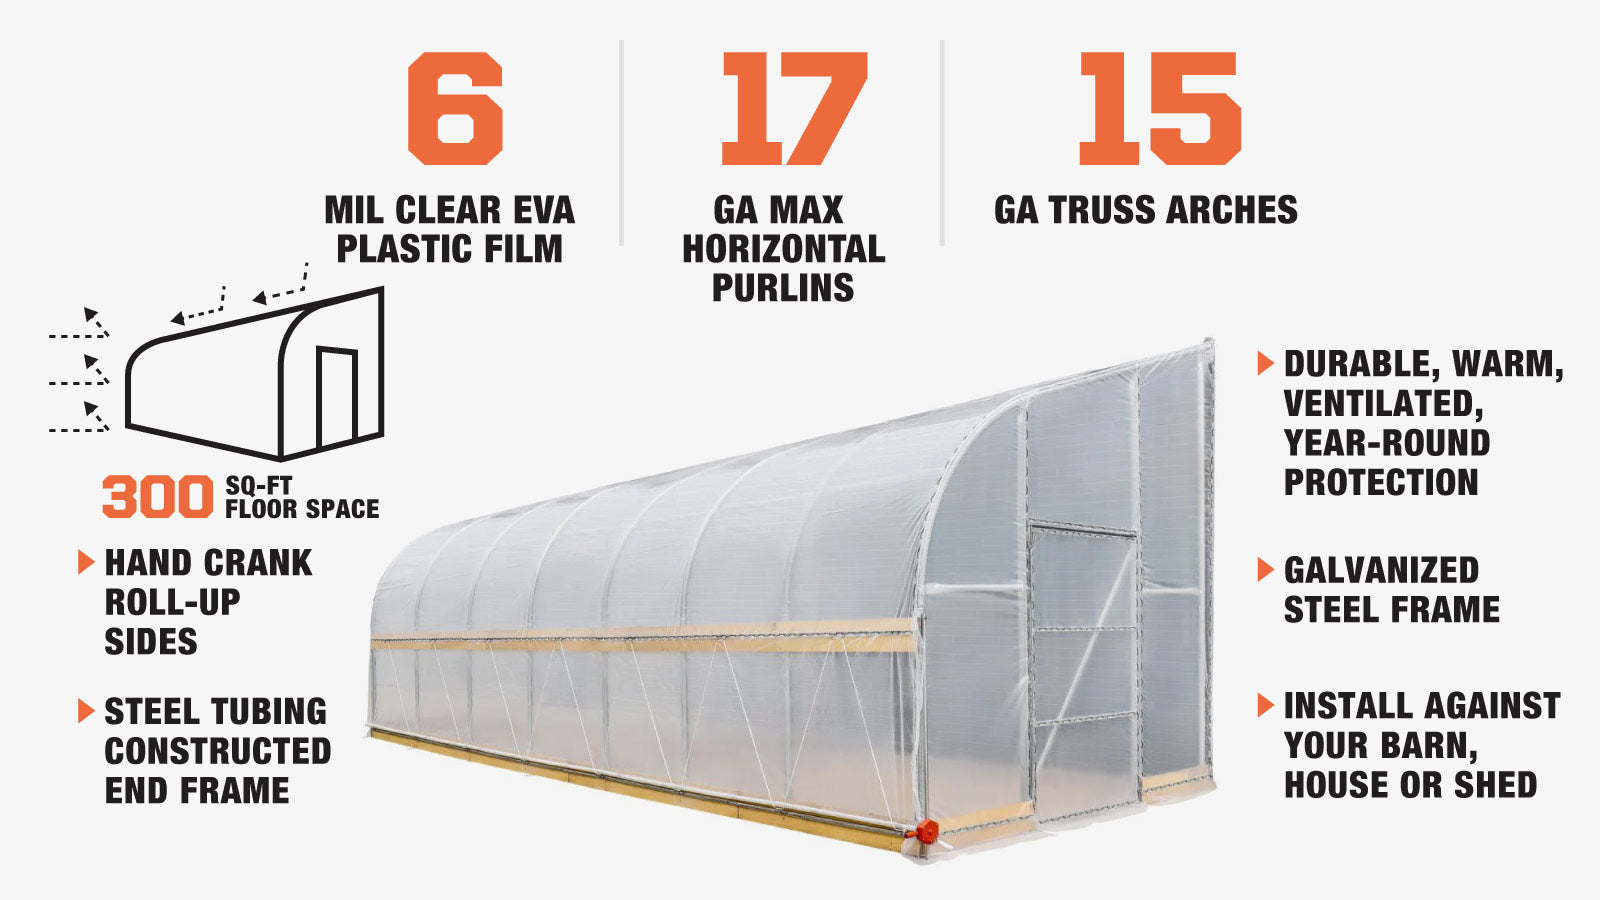 TMG Industrial 10' x 30' Lean-To Greenhouse Grow Tent w/6 Mil Clear EVA Plastic Film, Cold Frame, Manivelle Roll-Up Side, 6-½' Sidewall, TMG-GHL1030-description-image